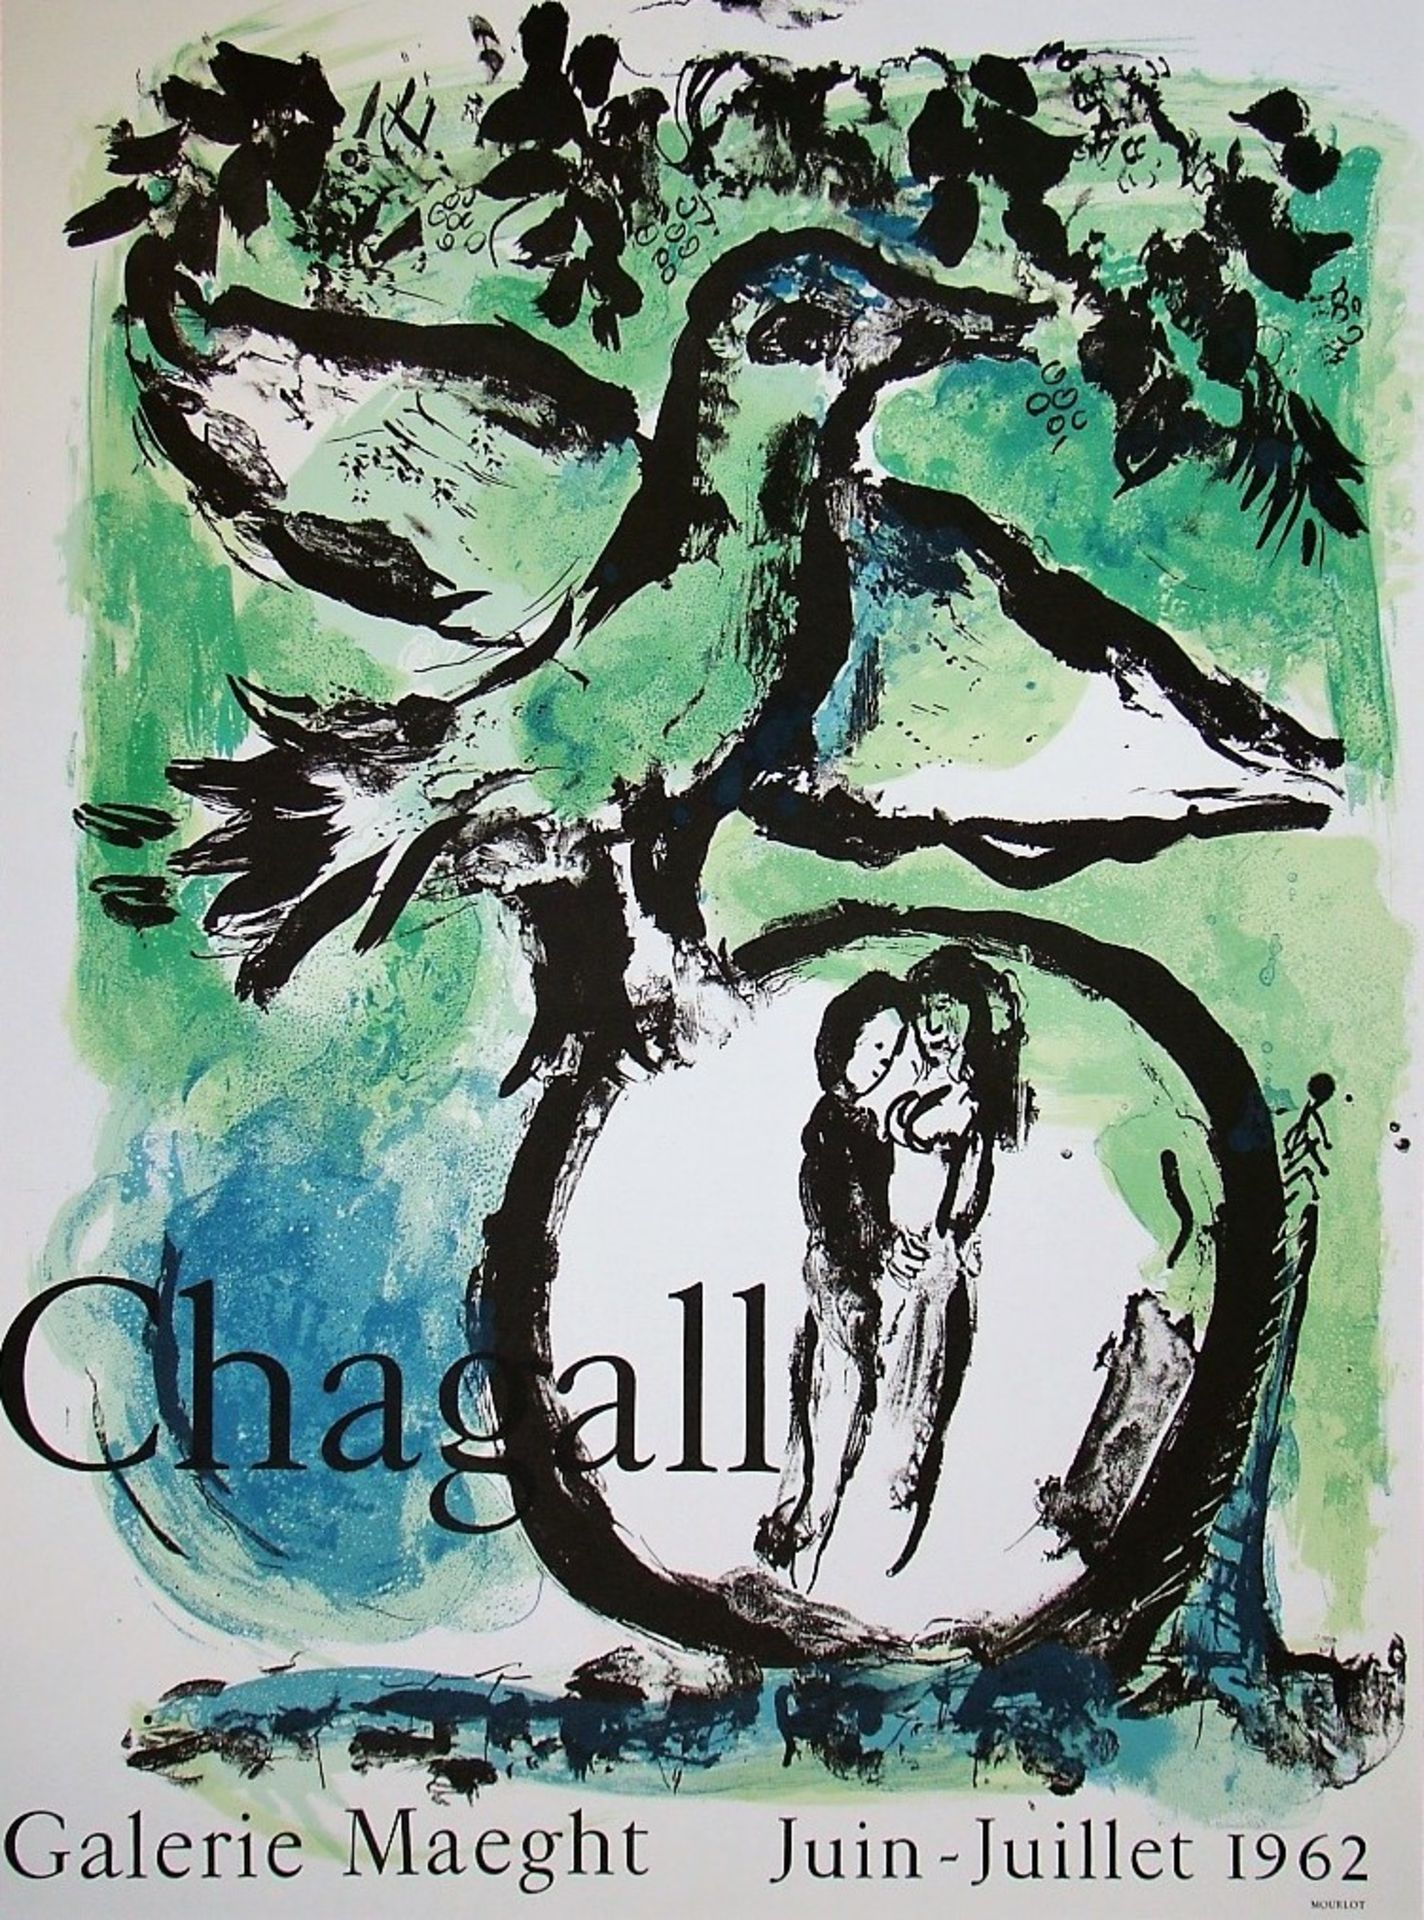 MARC CHAGALL - The green bird - 1962 Original exhibition placard, published in 1962 [...]